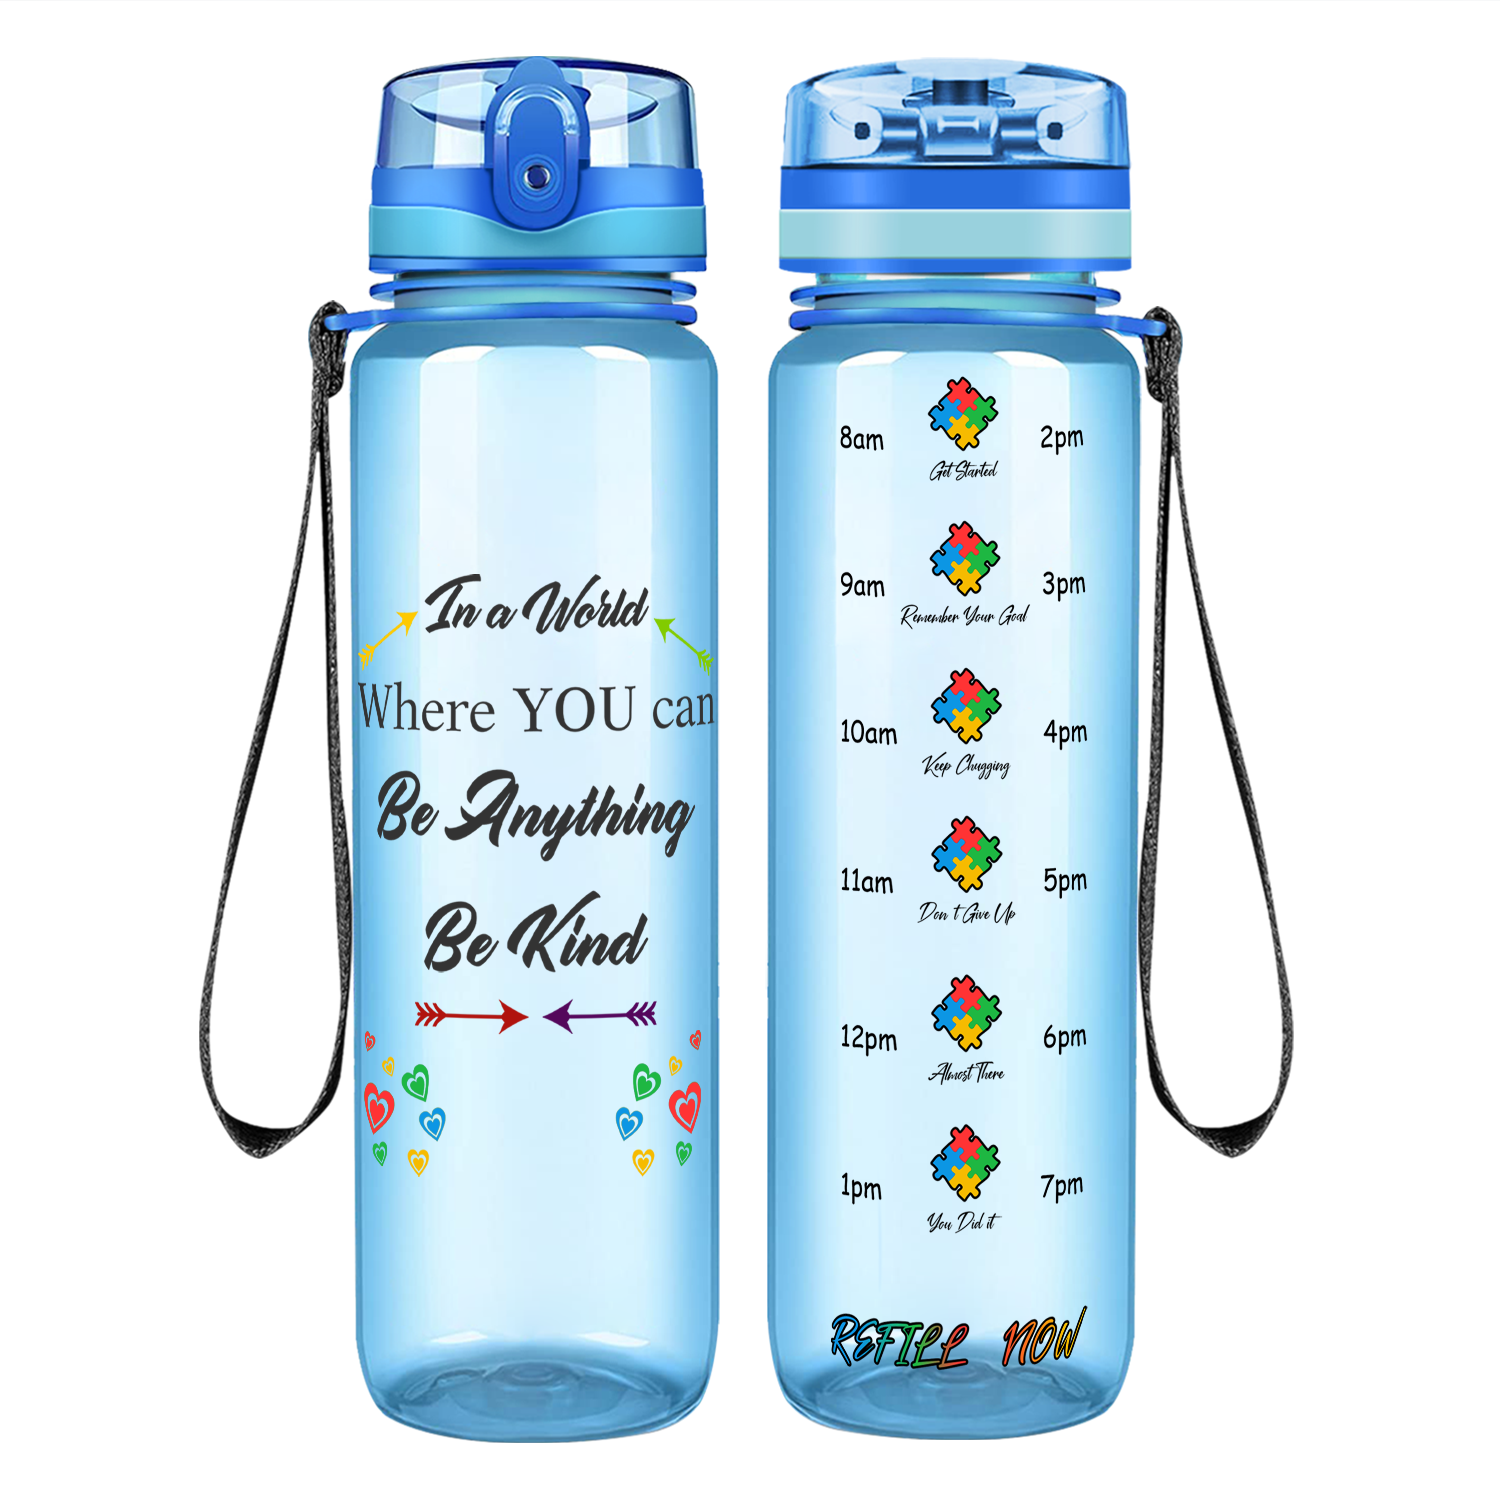 In a World Where You Can Be Anything Be Kind Motivational Tracking Water Bottle